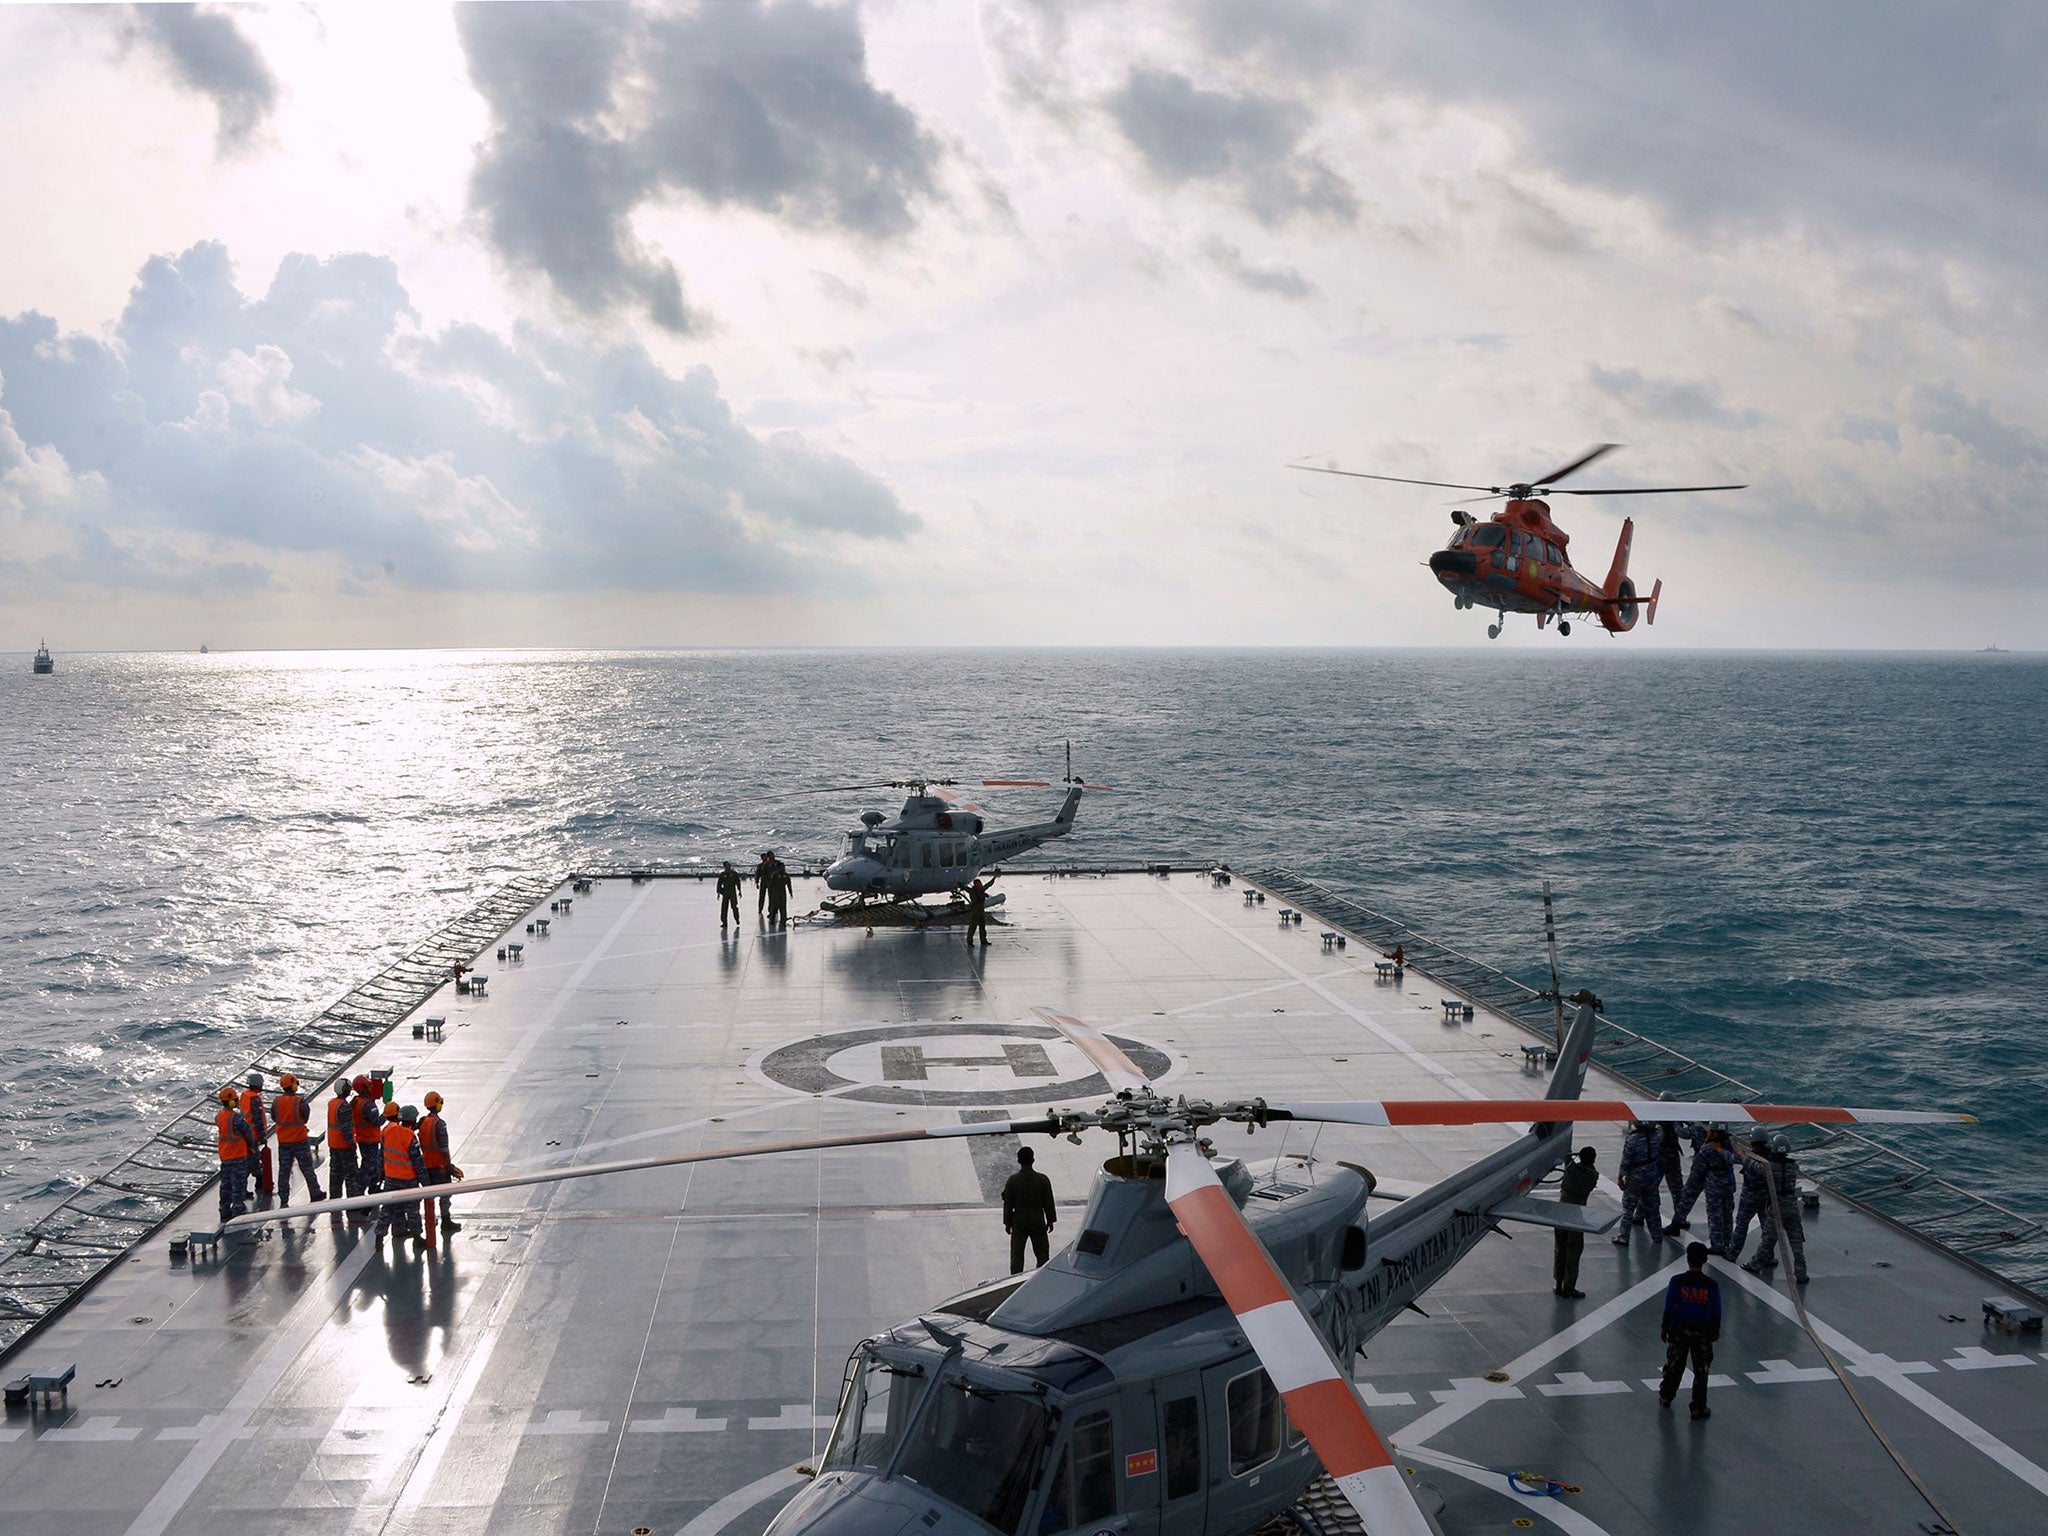 Indonesia search and rescue teams hunting for the wreck of an AirAsia passenger jet have detected pings